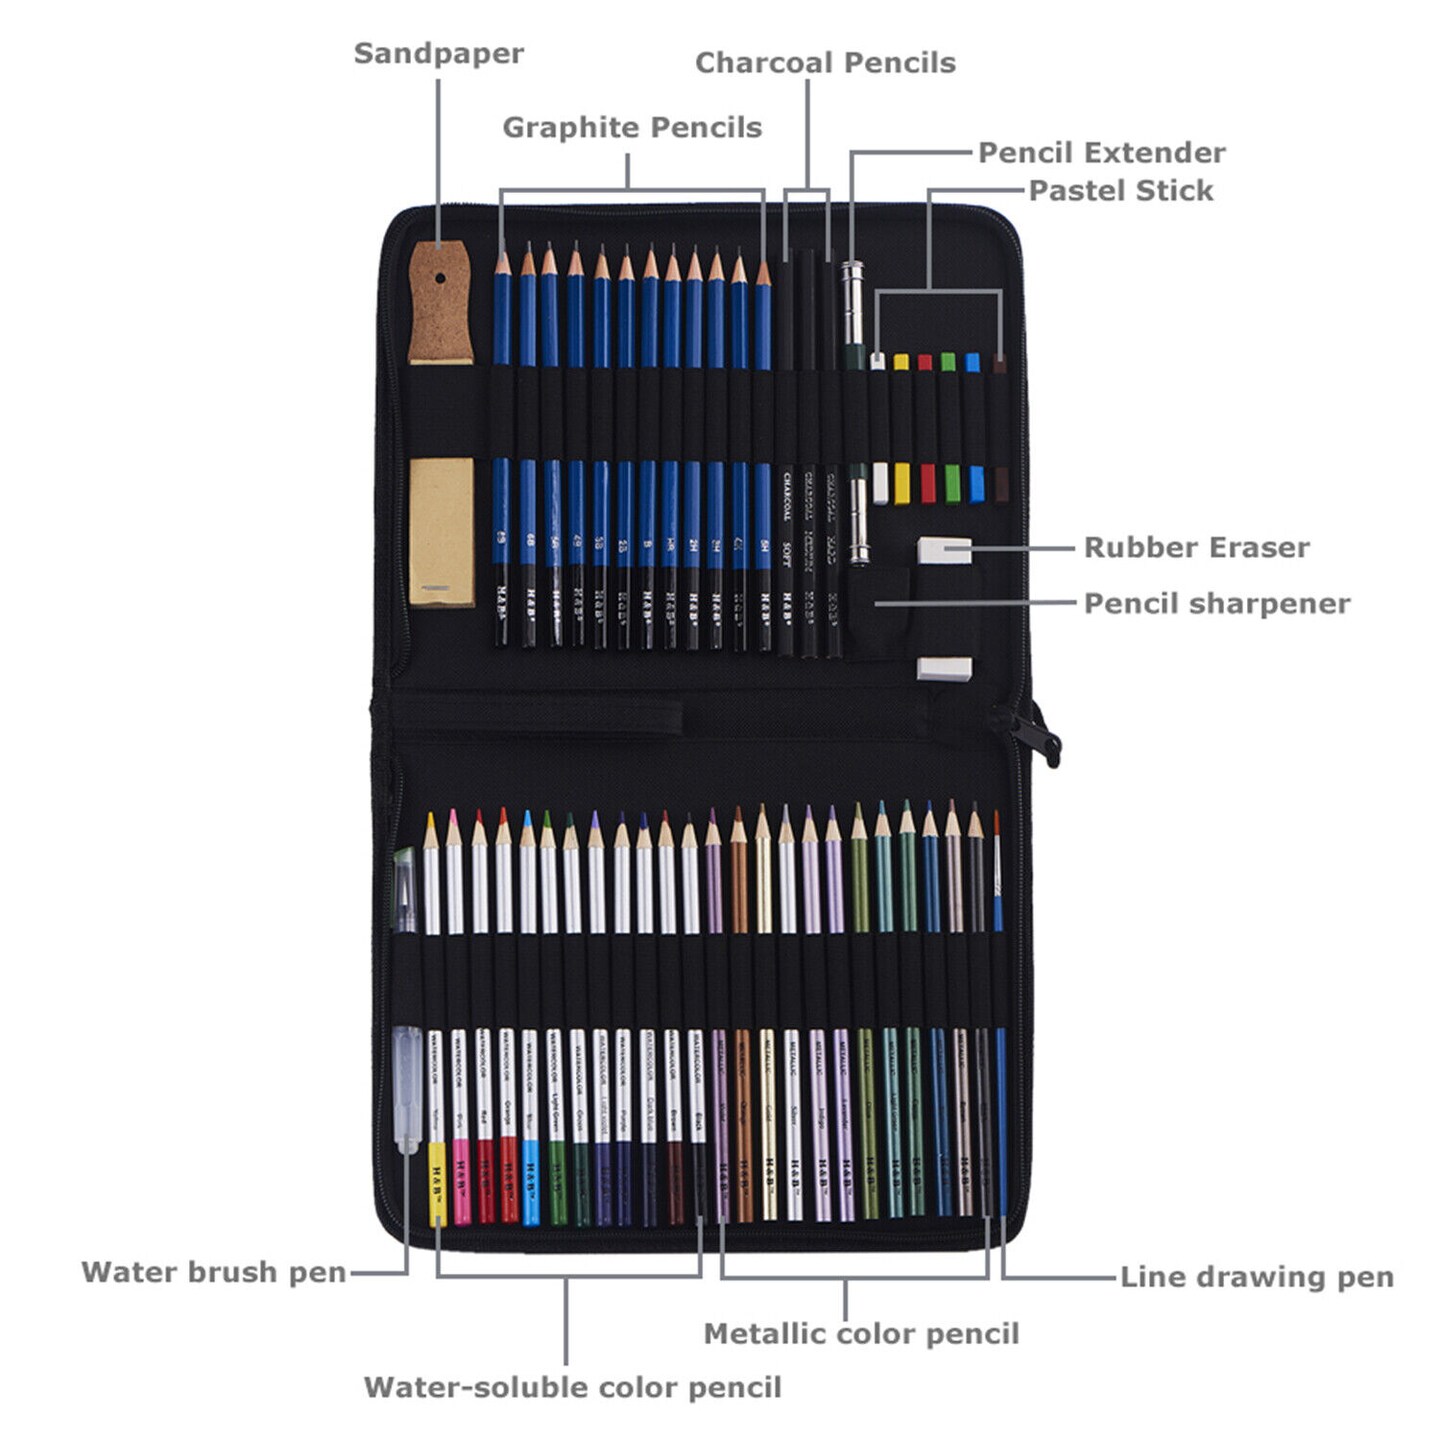 51-Piece Professional Drawing Set with Pencils, Sketch Charcoal, and Art Bag